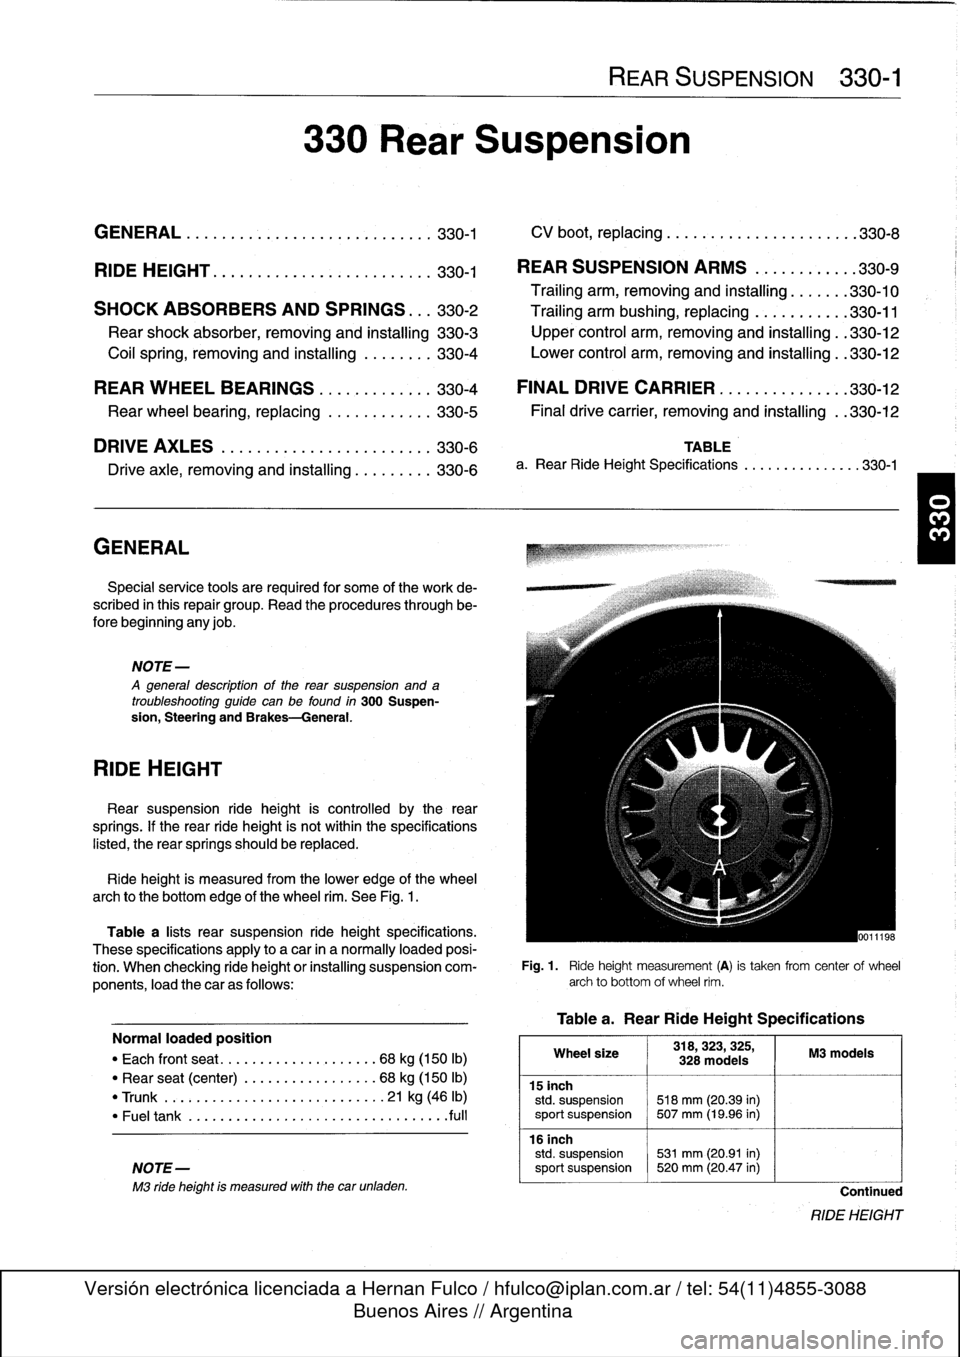 BMW 328i 1994 E36 Workshop Manual 
GENERAL
.......
.
.
.
.
.
.
.
.
.
.......
.
...
.330-1

	

CV
boot,
replacing
........
.
.
.
.........
.
.330-8

RIDE
HEIGHT
....
.
.
.
.
.
...
.
...
.
.
.
.
.
...
.
330-1

	

REAR
SUSPENSION
ARMS
.
